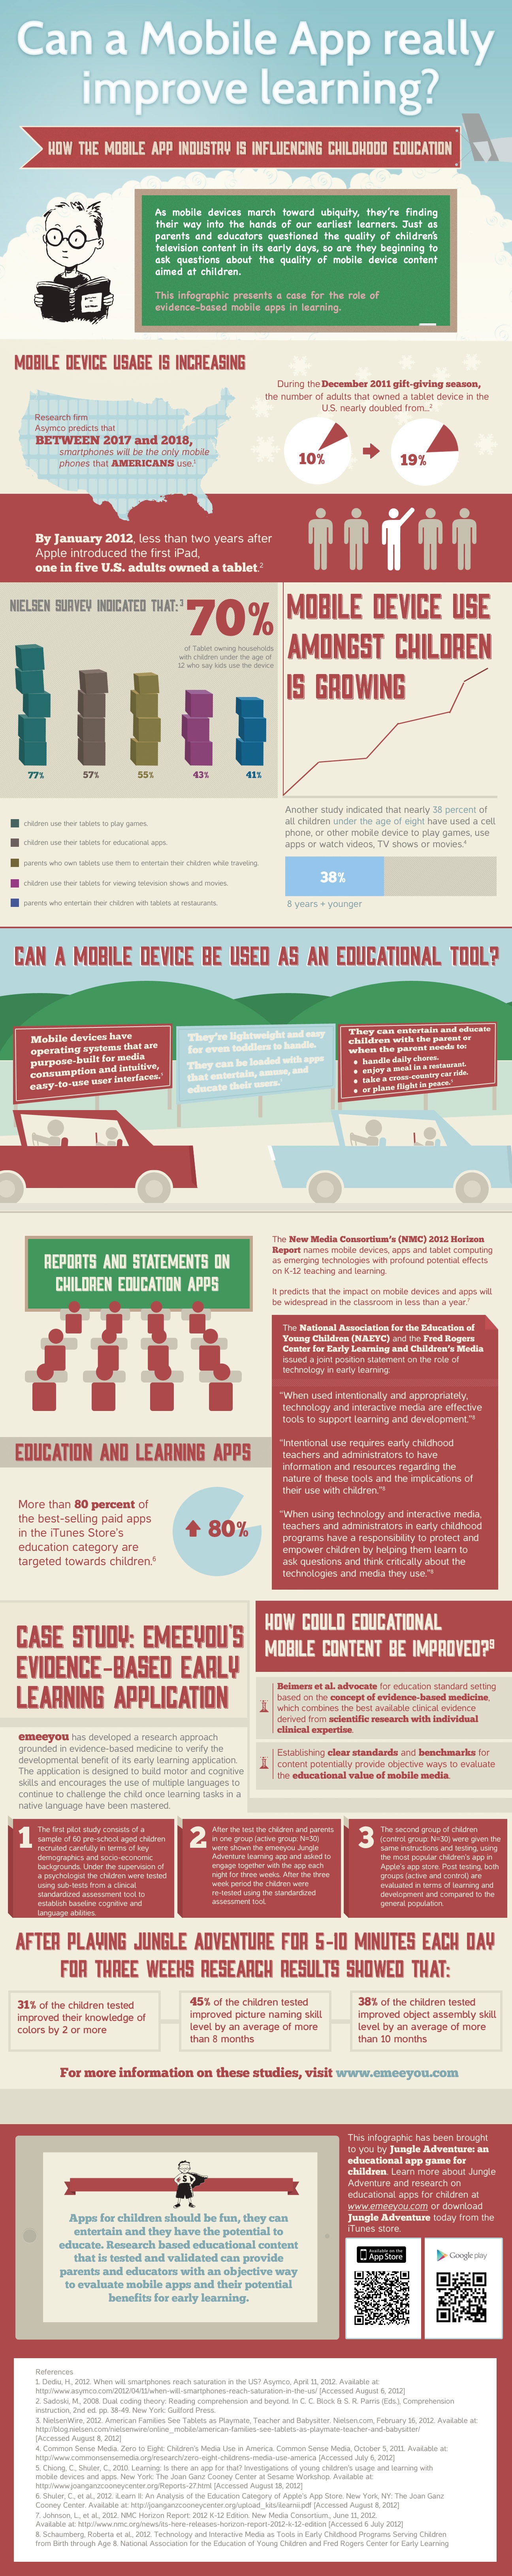 How an Educational App is Improving Childhood Education Infographic